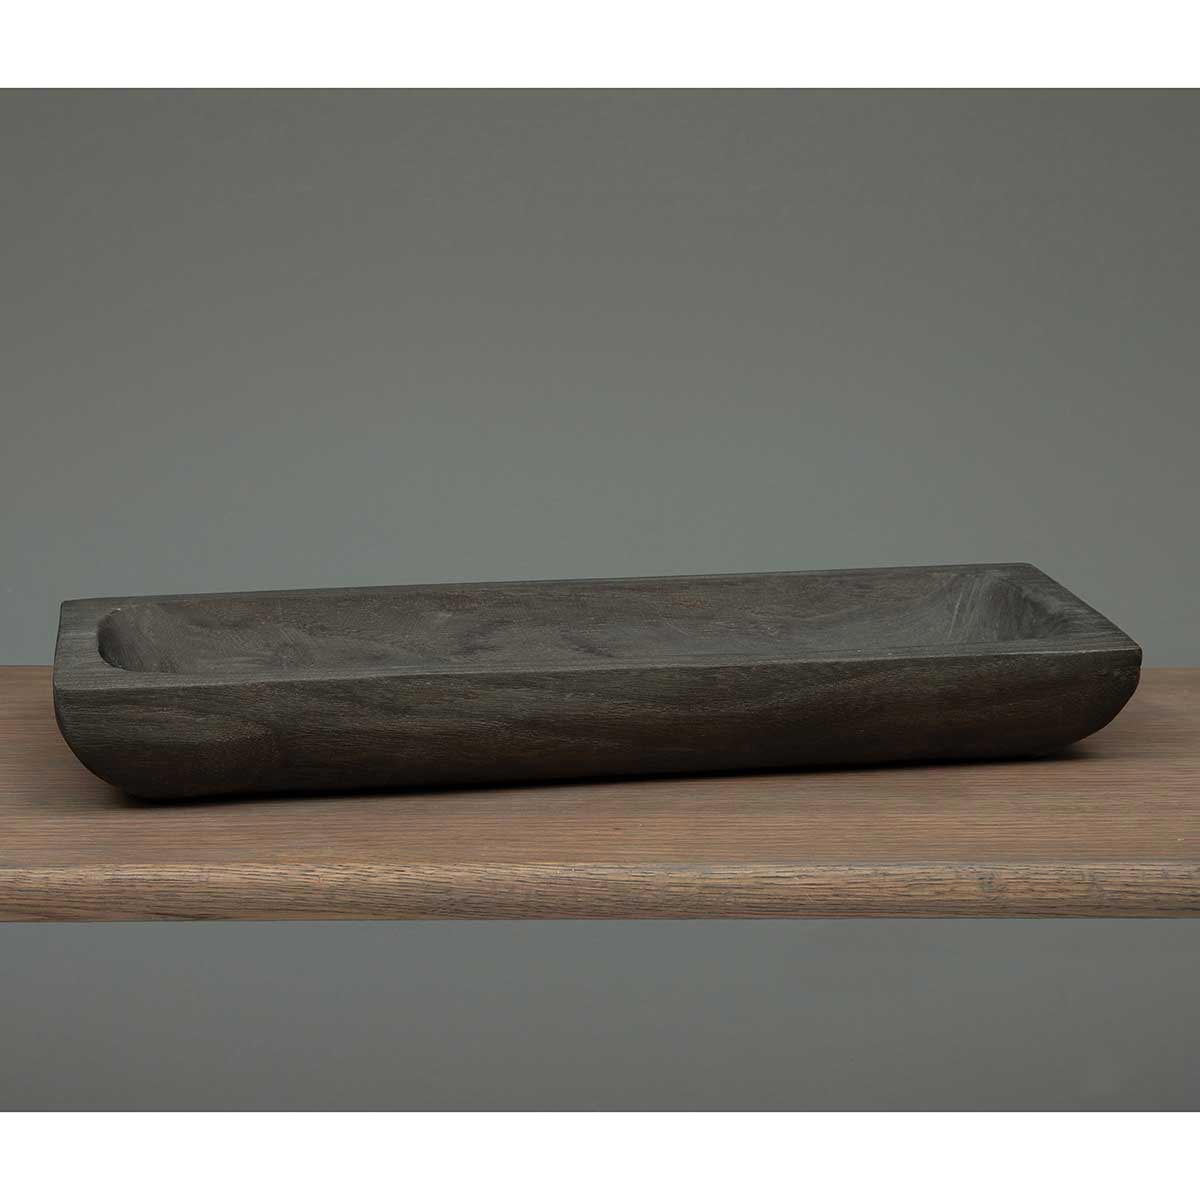 WOOD CURVED RECTANGLE TRAY BLACK 18.75"X5.75"X2.5"